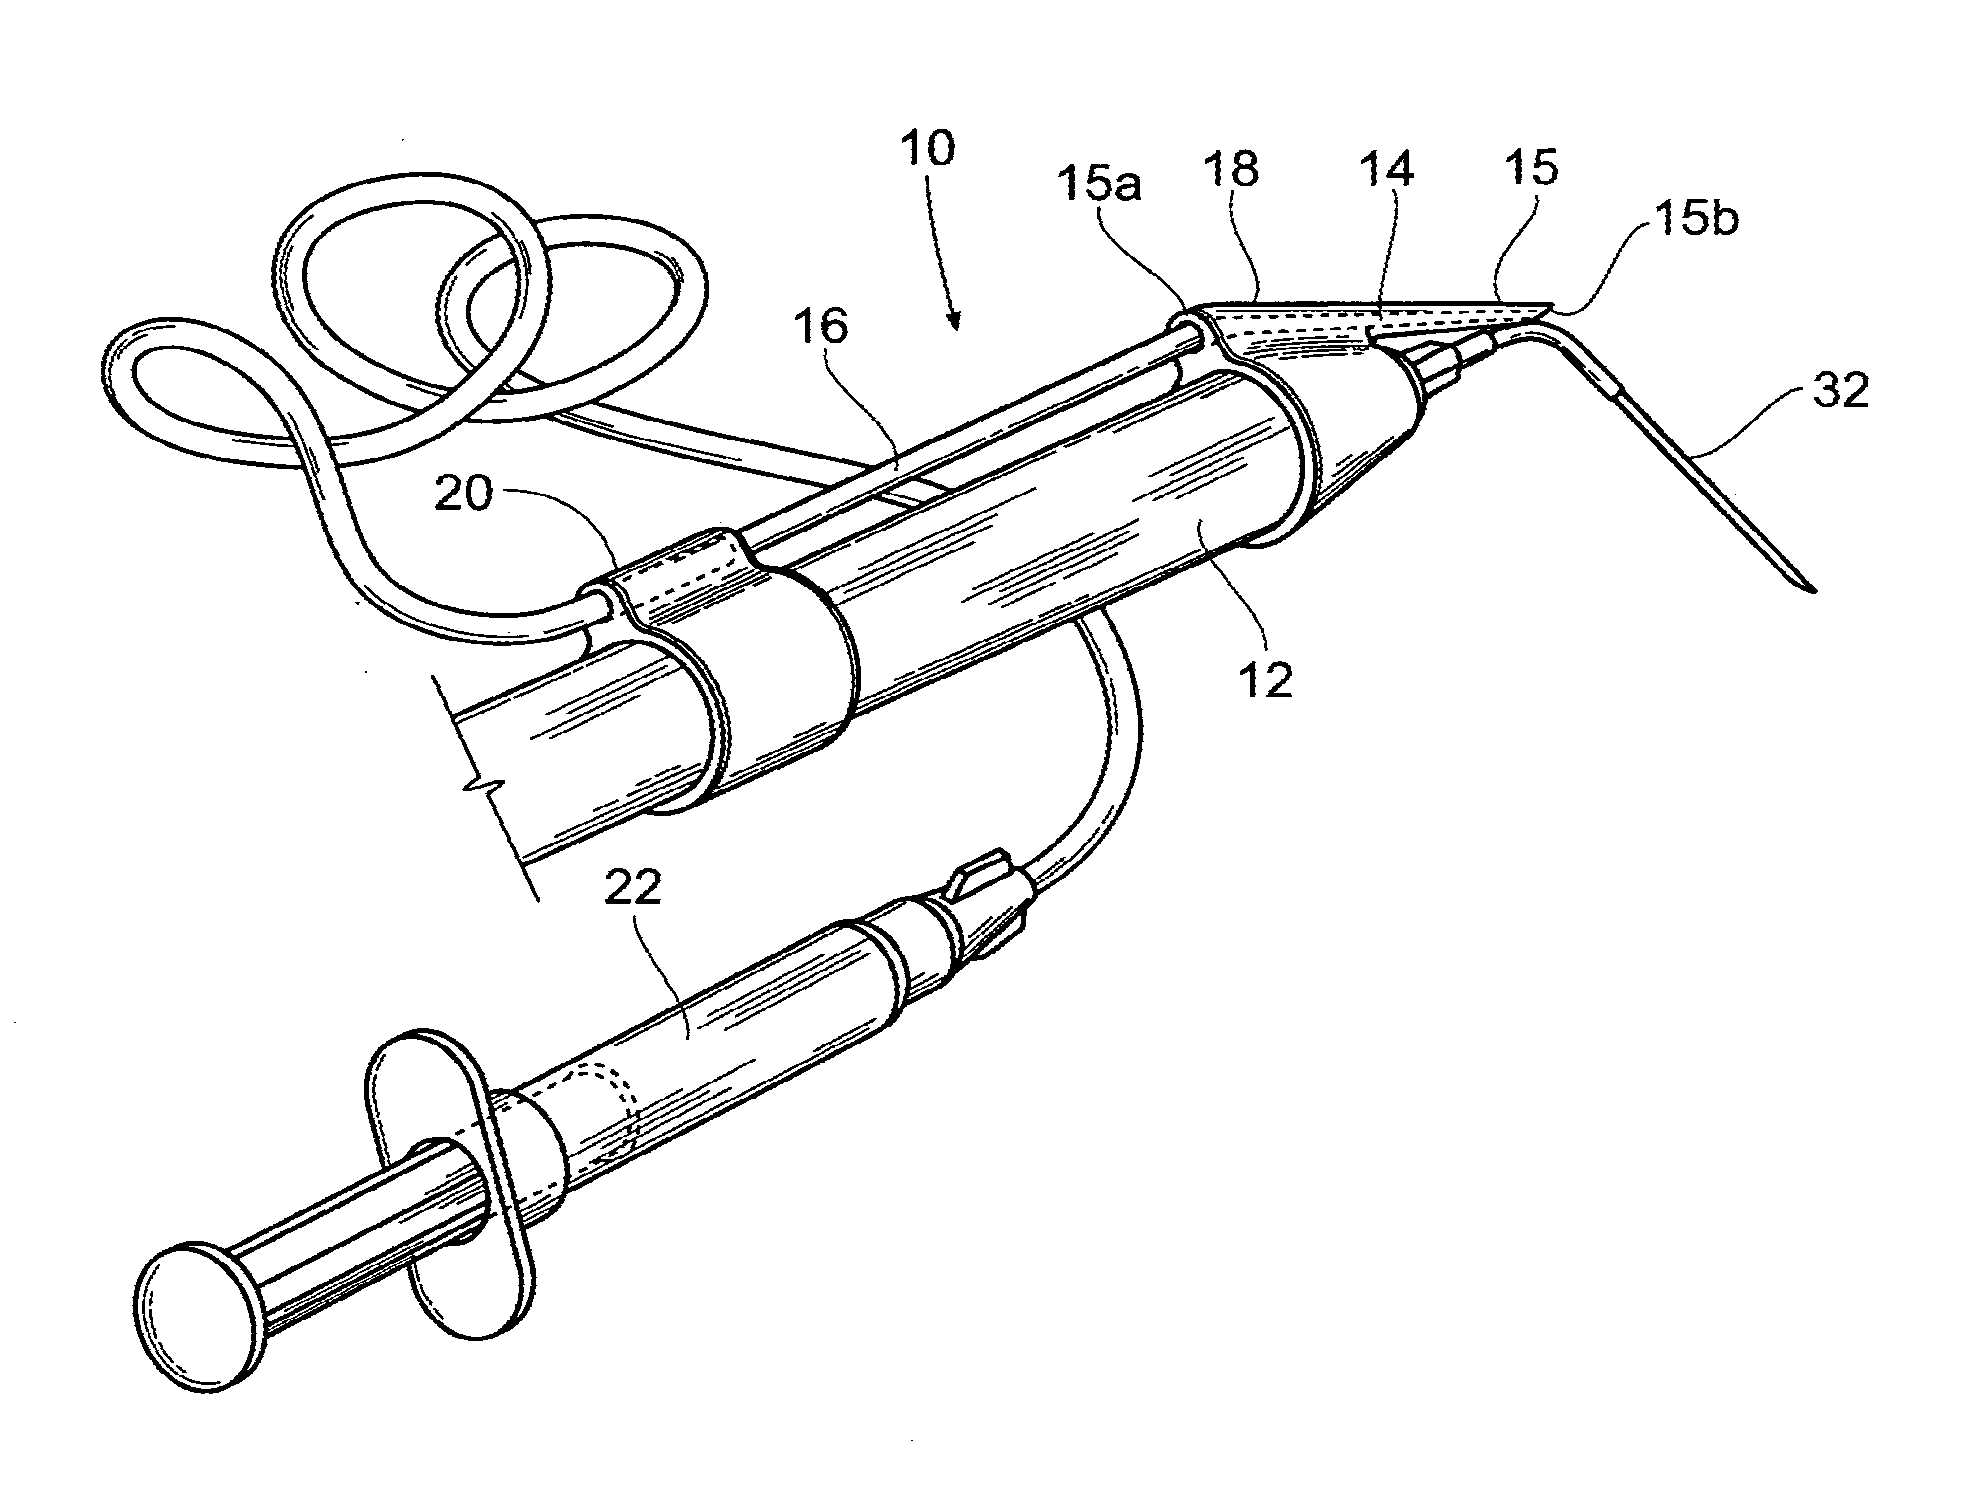 Fluid Bypass Device for Handheld Dental Devices